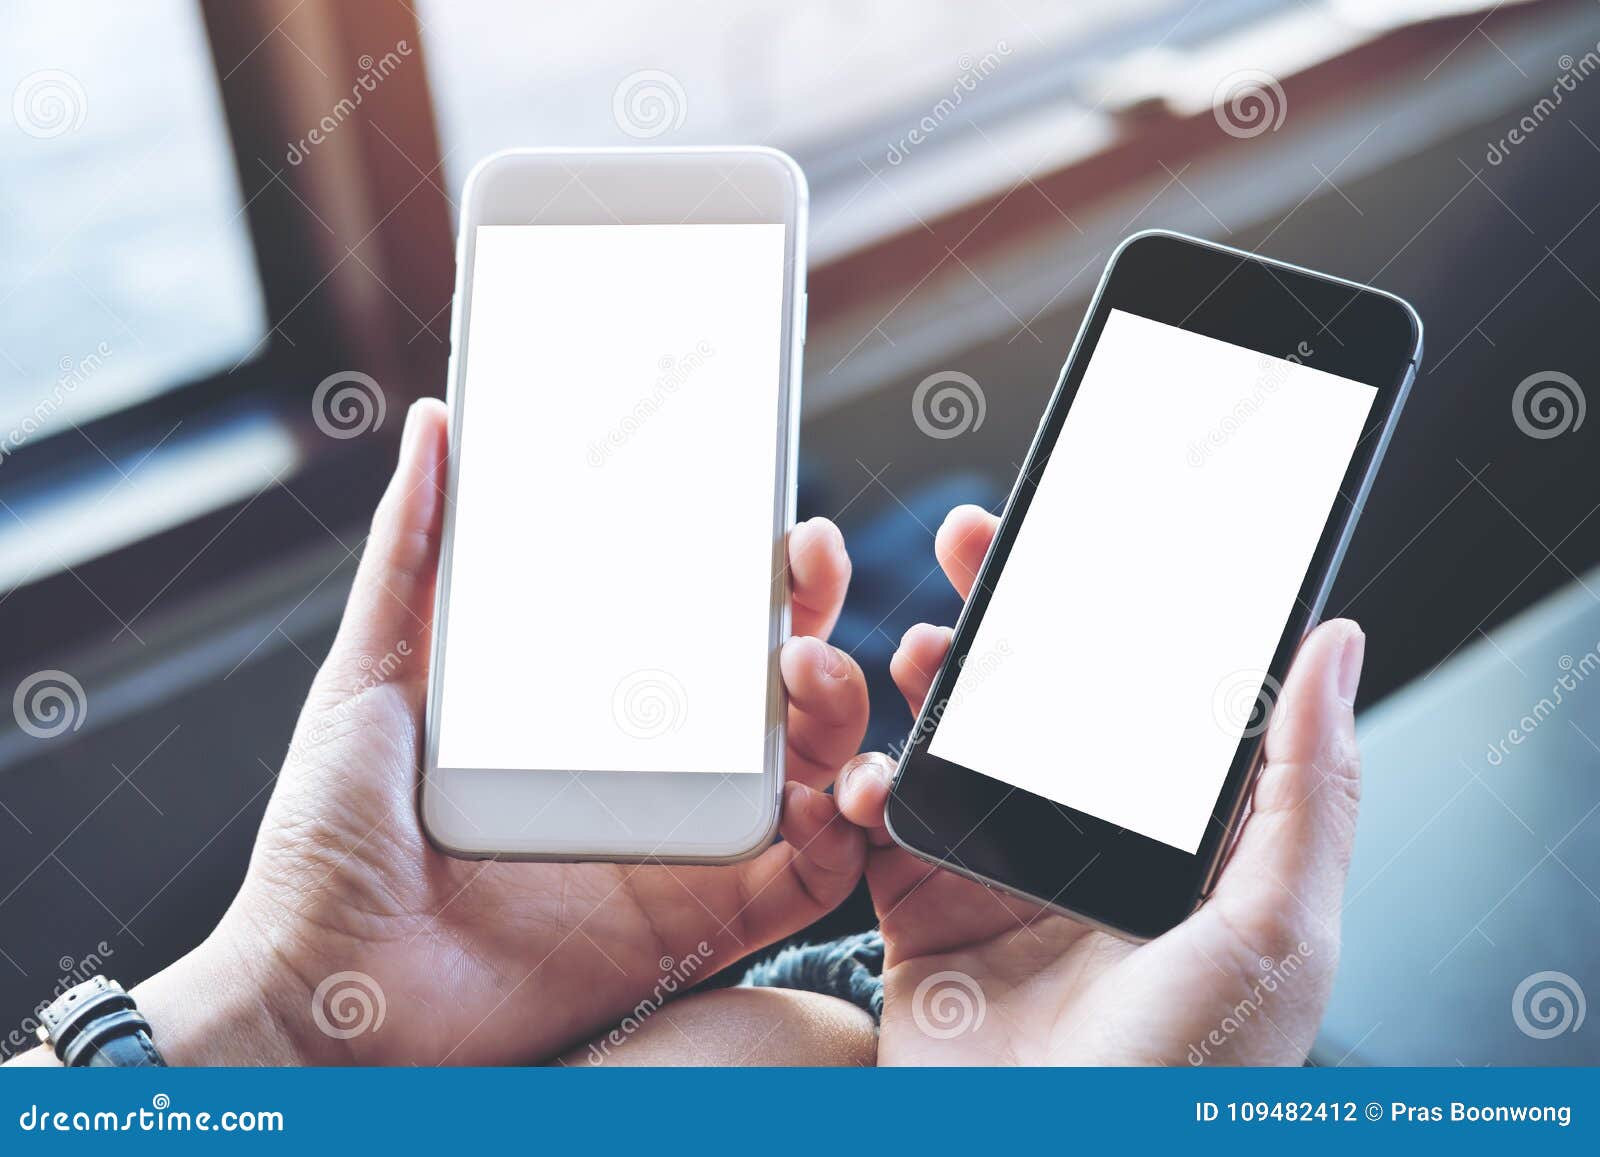 a woman`s hands holding two mobile phones with blank white screen in modern cafe